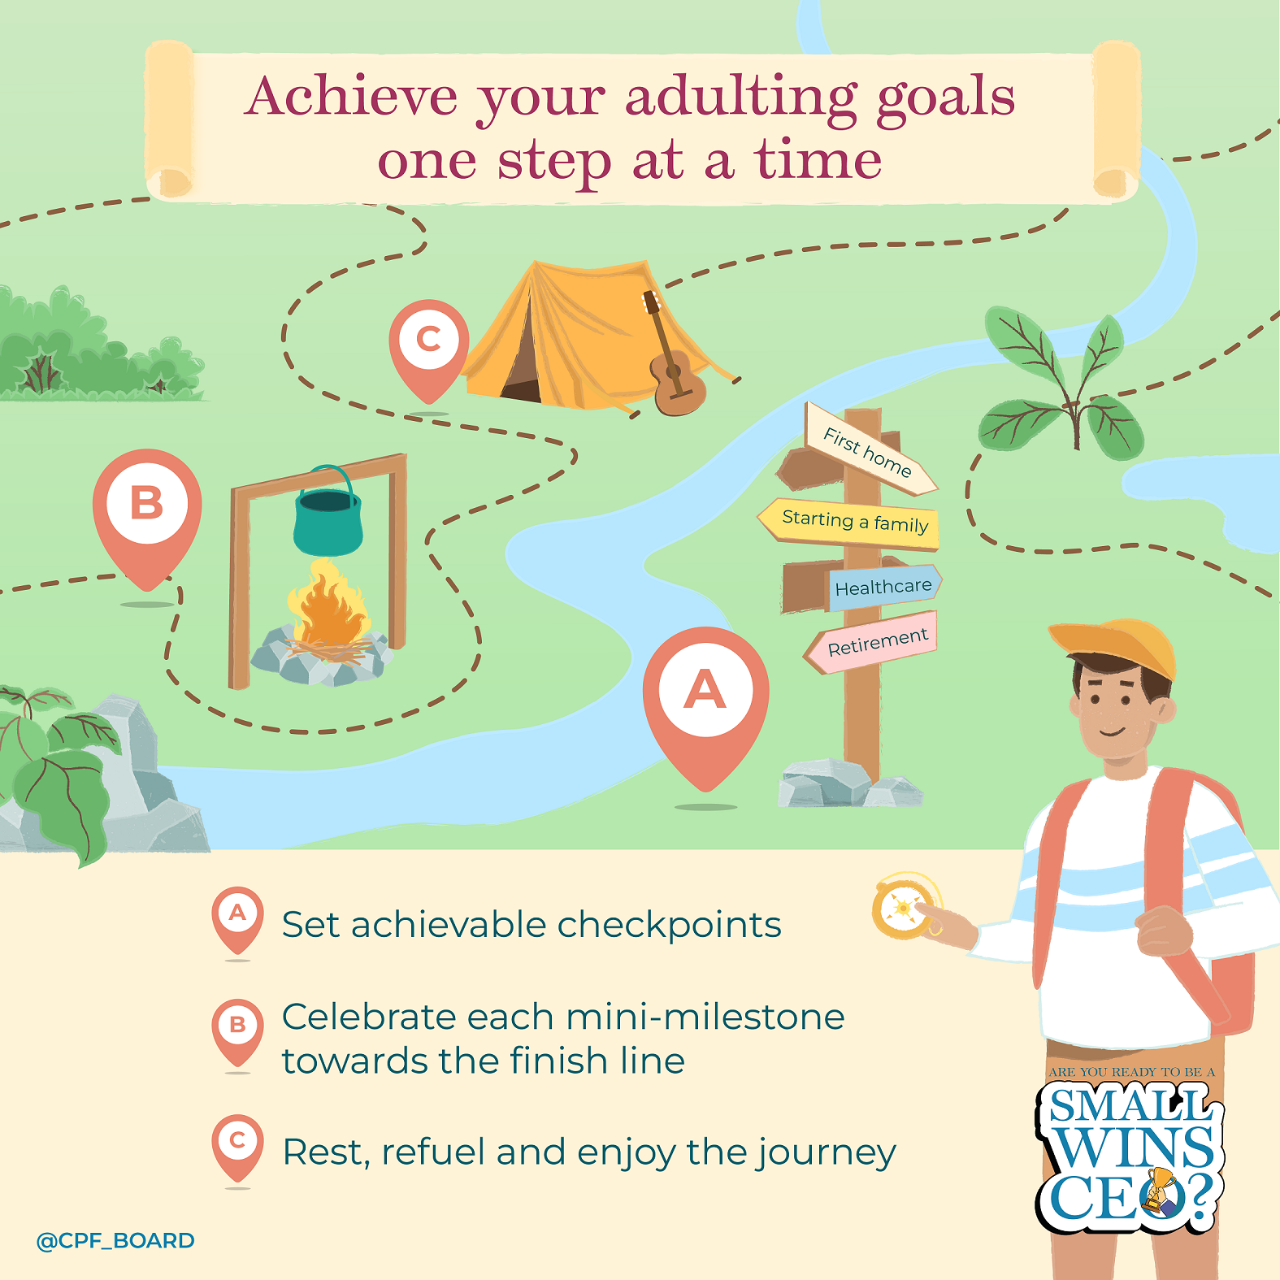 achieve your adulting goals one step at a time